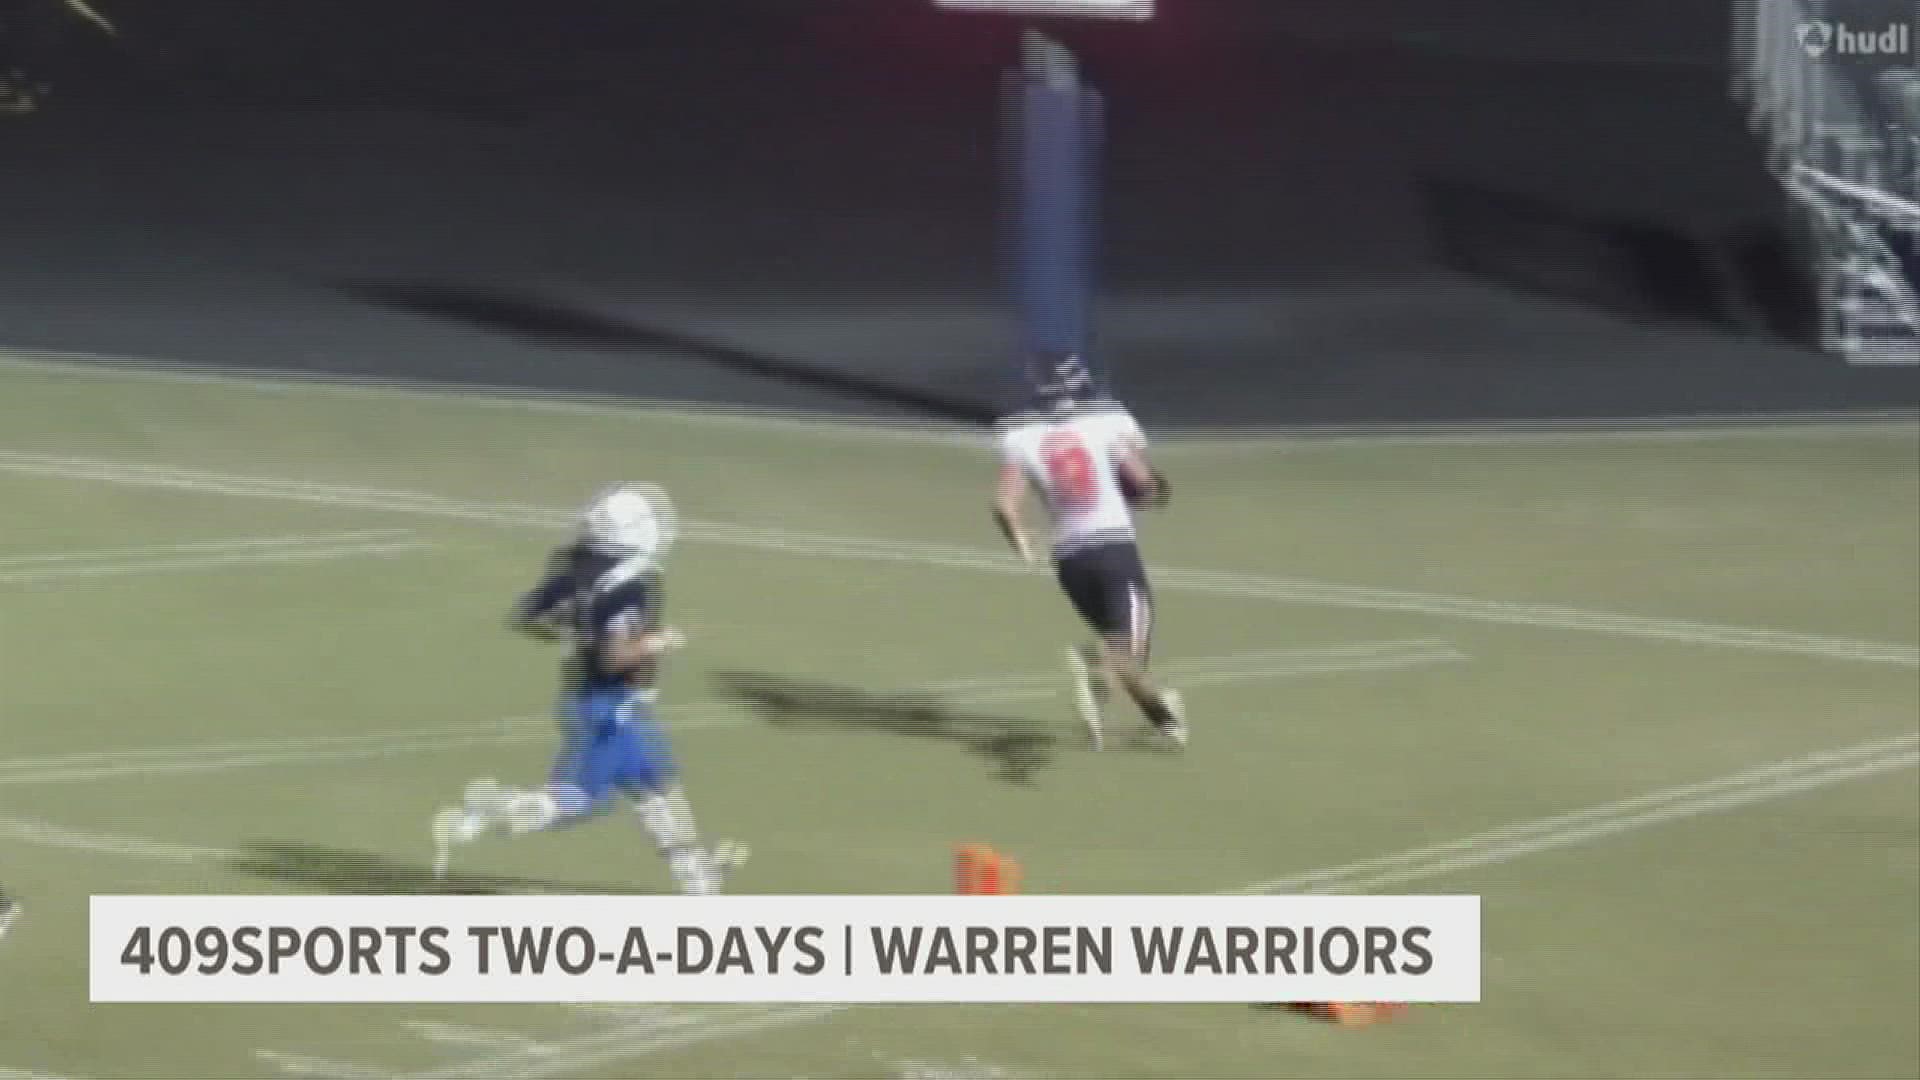 Last season, the Warren Warriors found their first district win since 2017 and head coach Austin Smithey says they're focused on finding that momentum again.